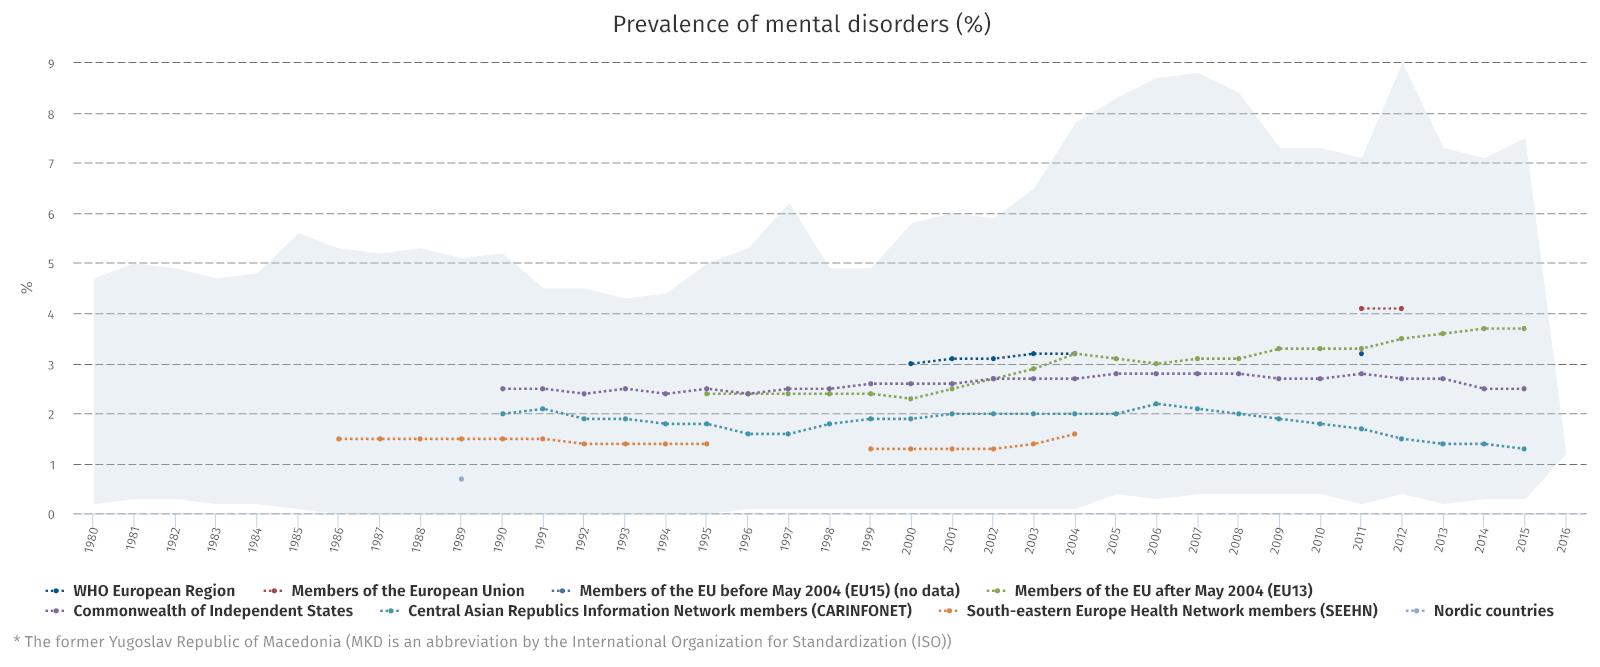 Prevalence of mental disorders